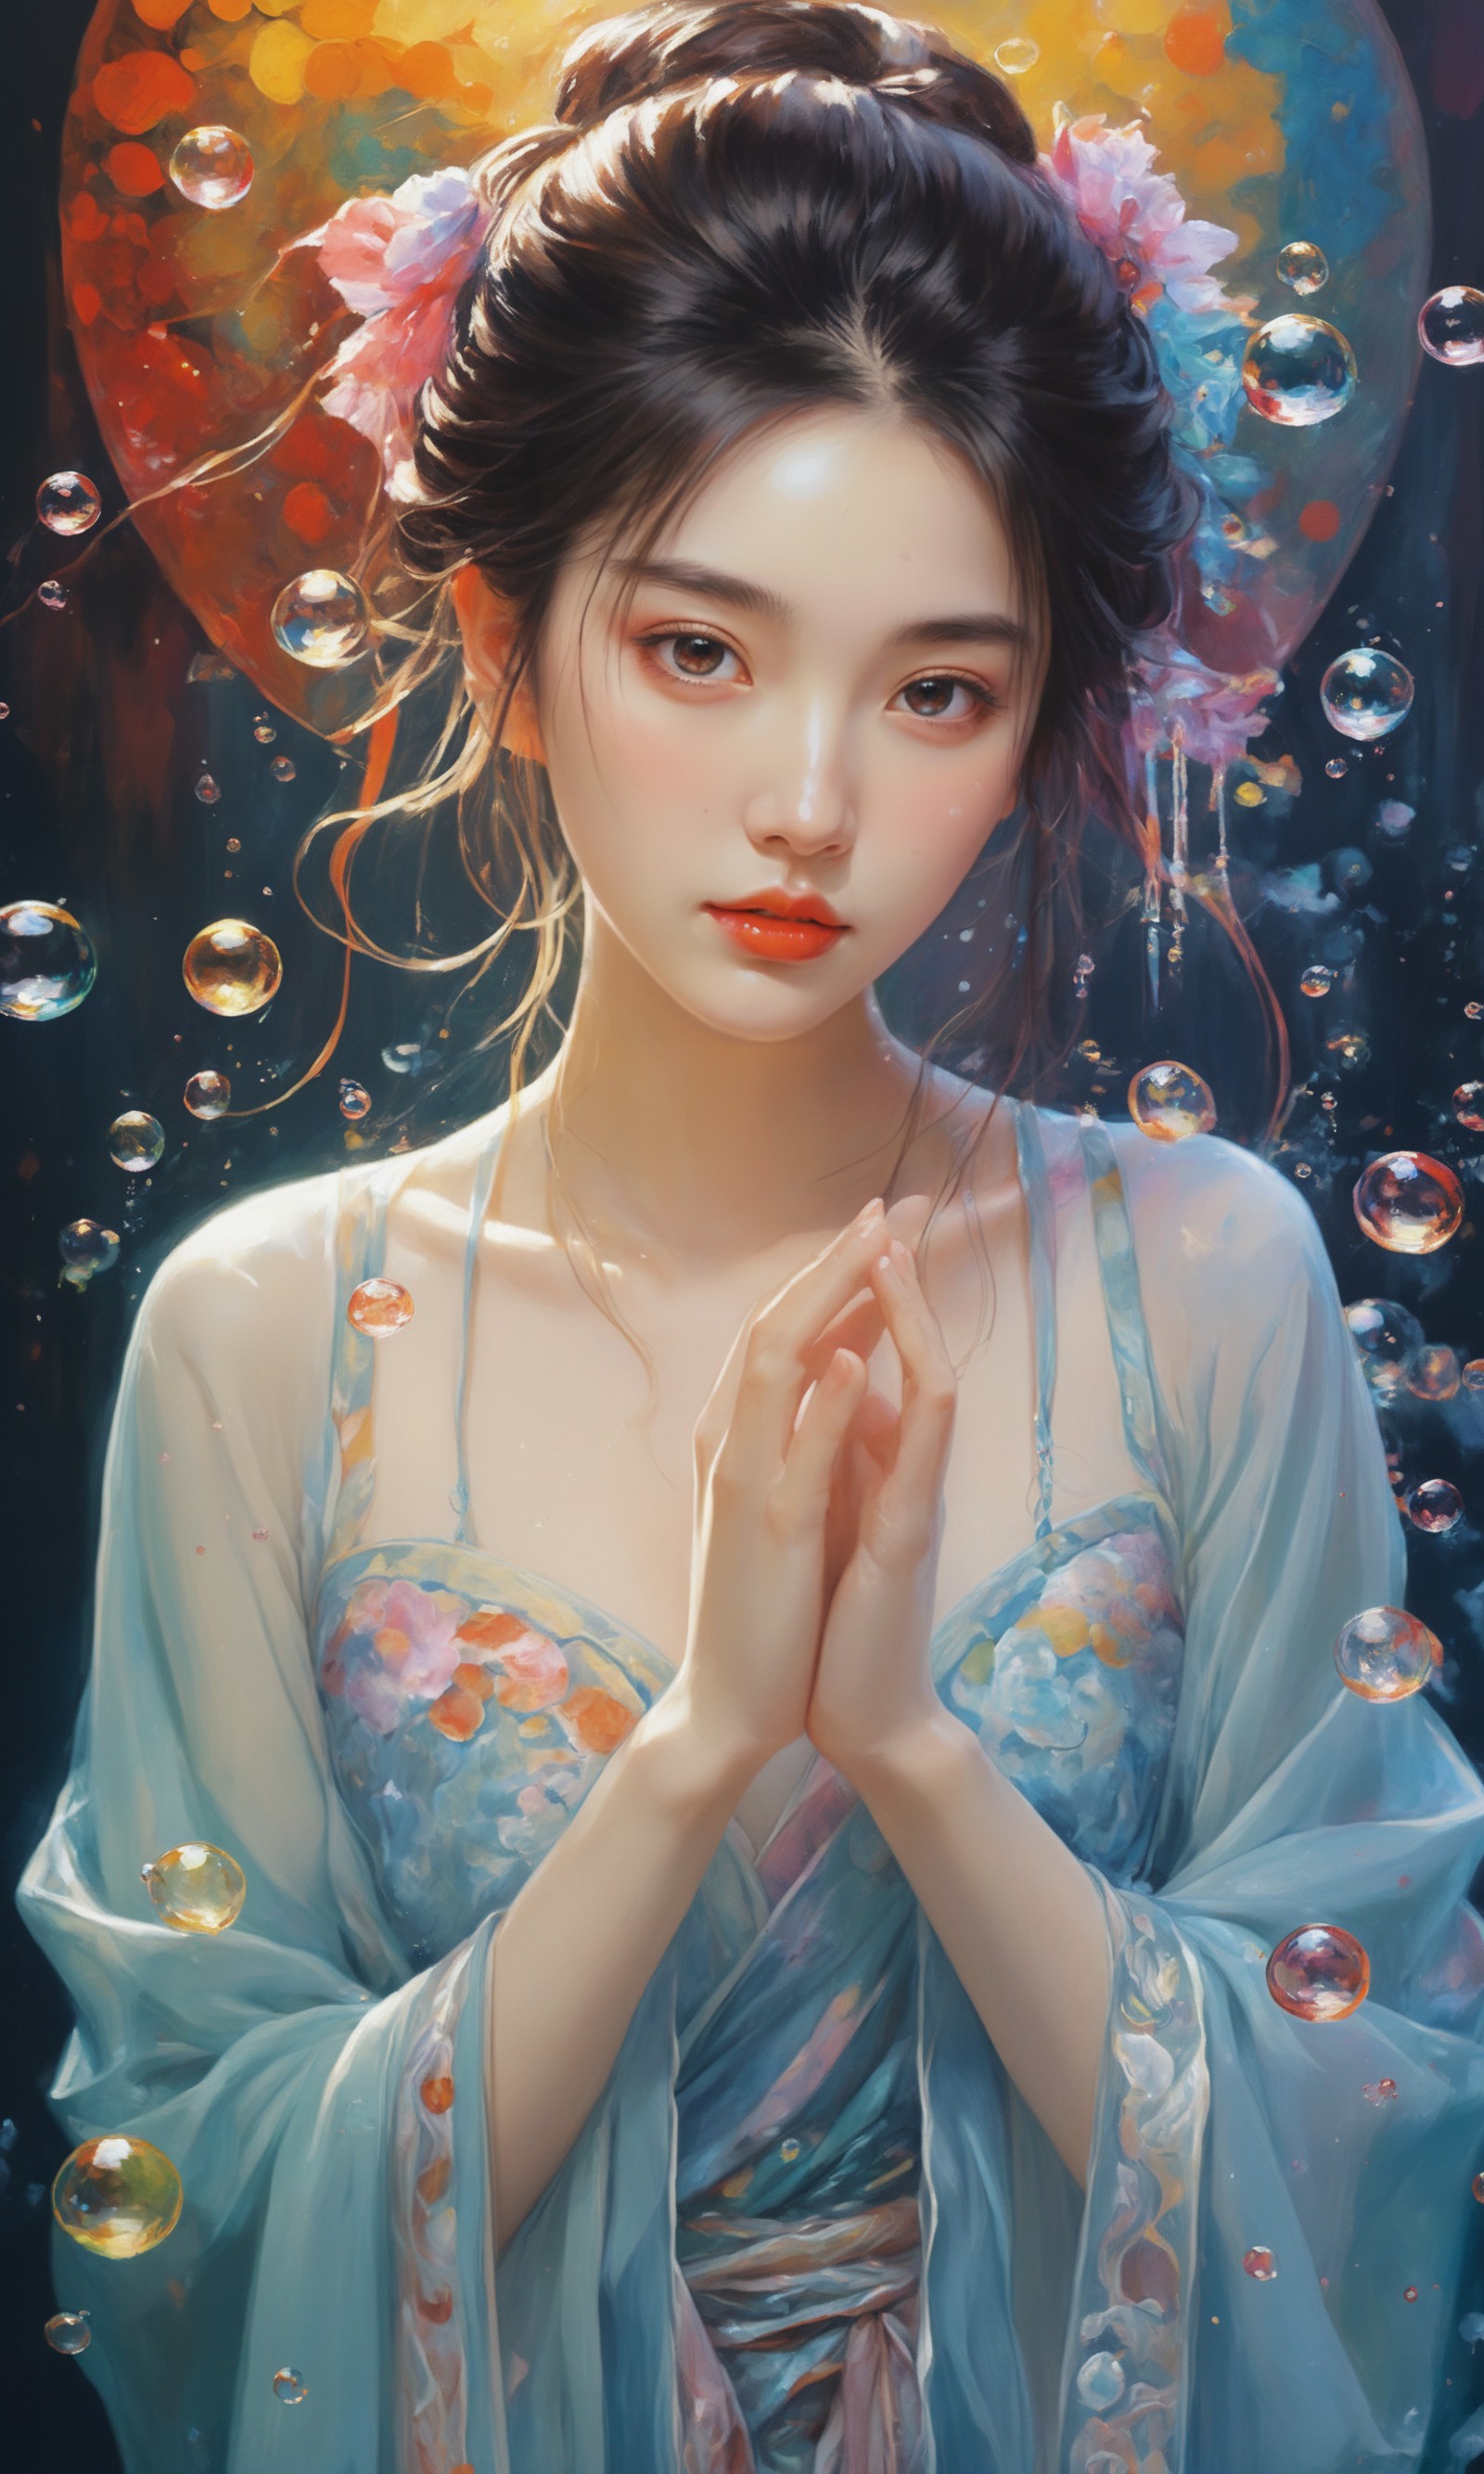 Colorful colors,surrounded by water bubbles,oil paintings painted in anime style,chinese girls,